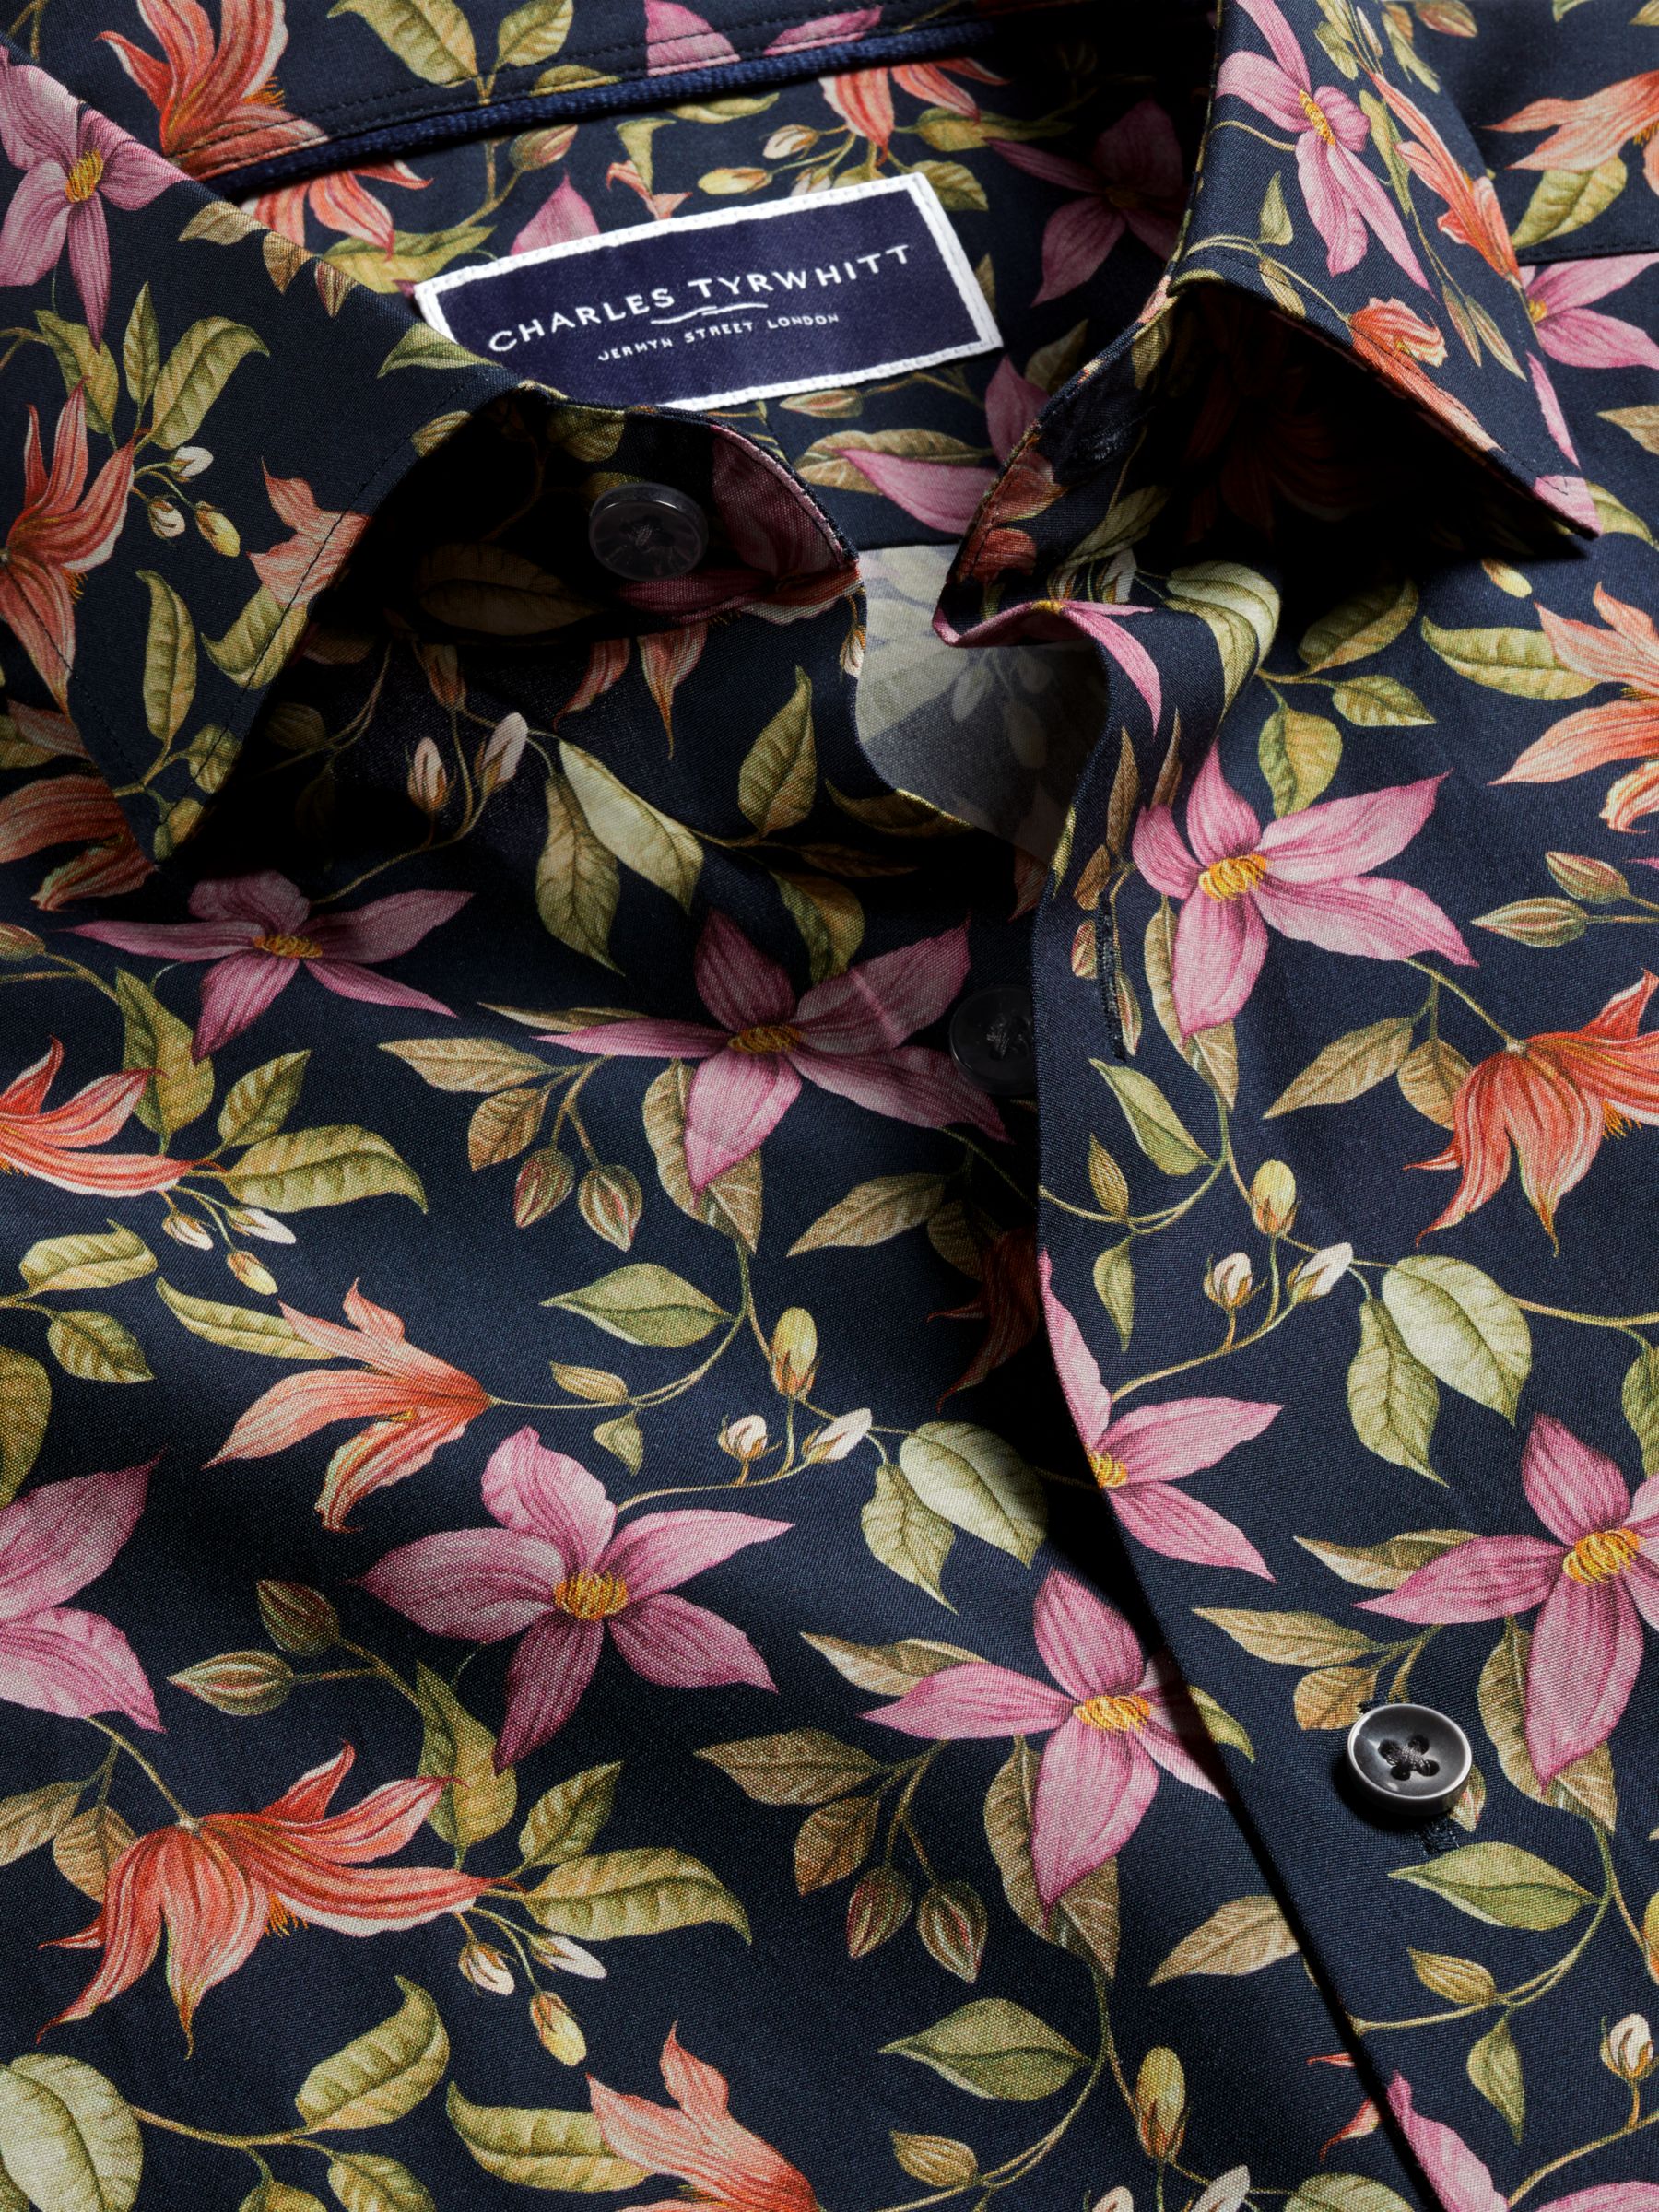 Buy Charles Tyrwhitt Classic Fit Large Floral Liberty Print Shirt, Navy/Multi Online at johnlewis.com